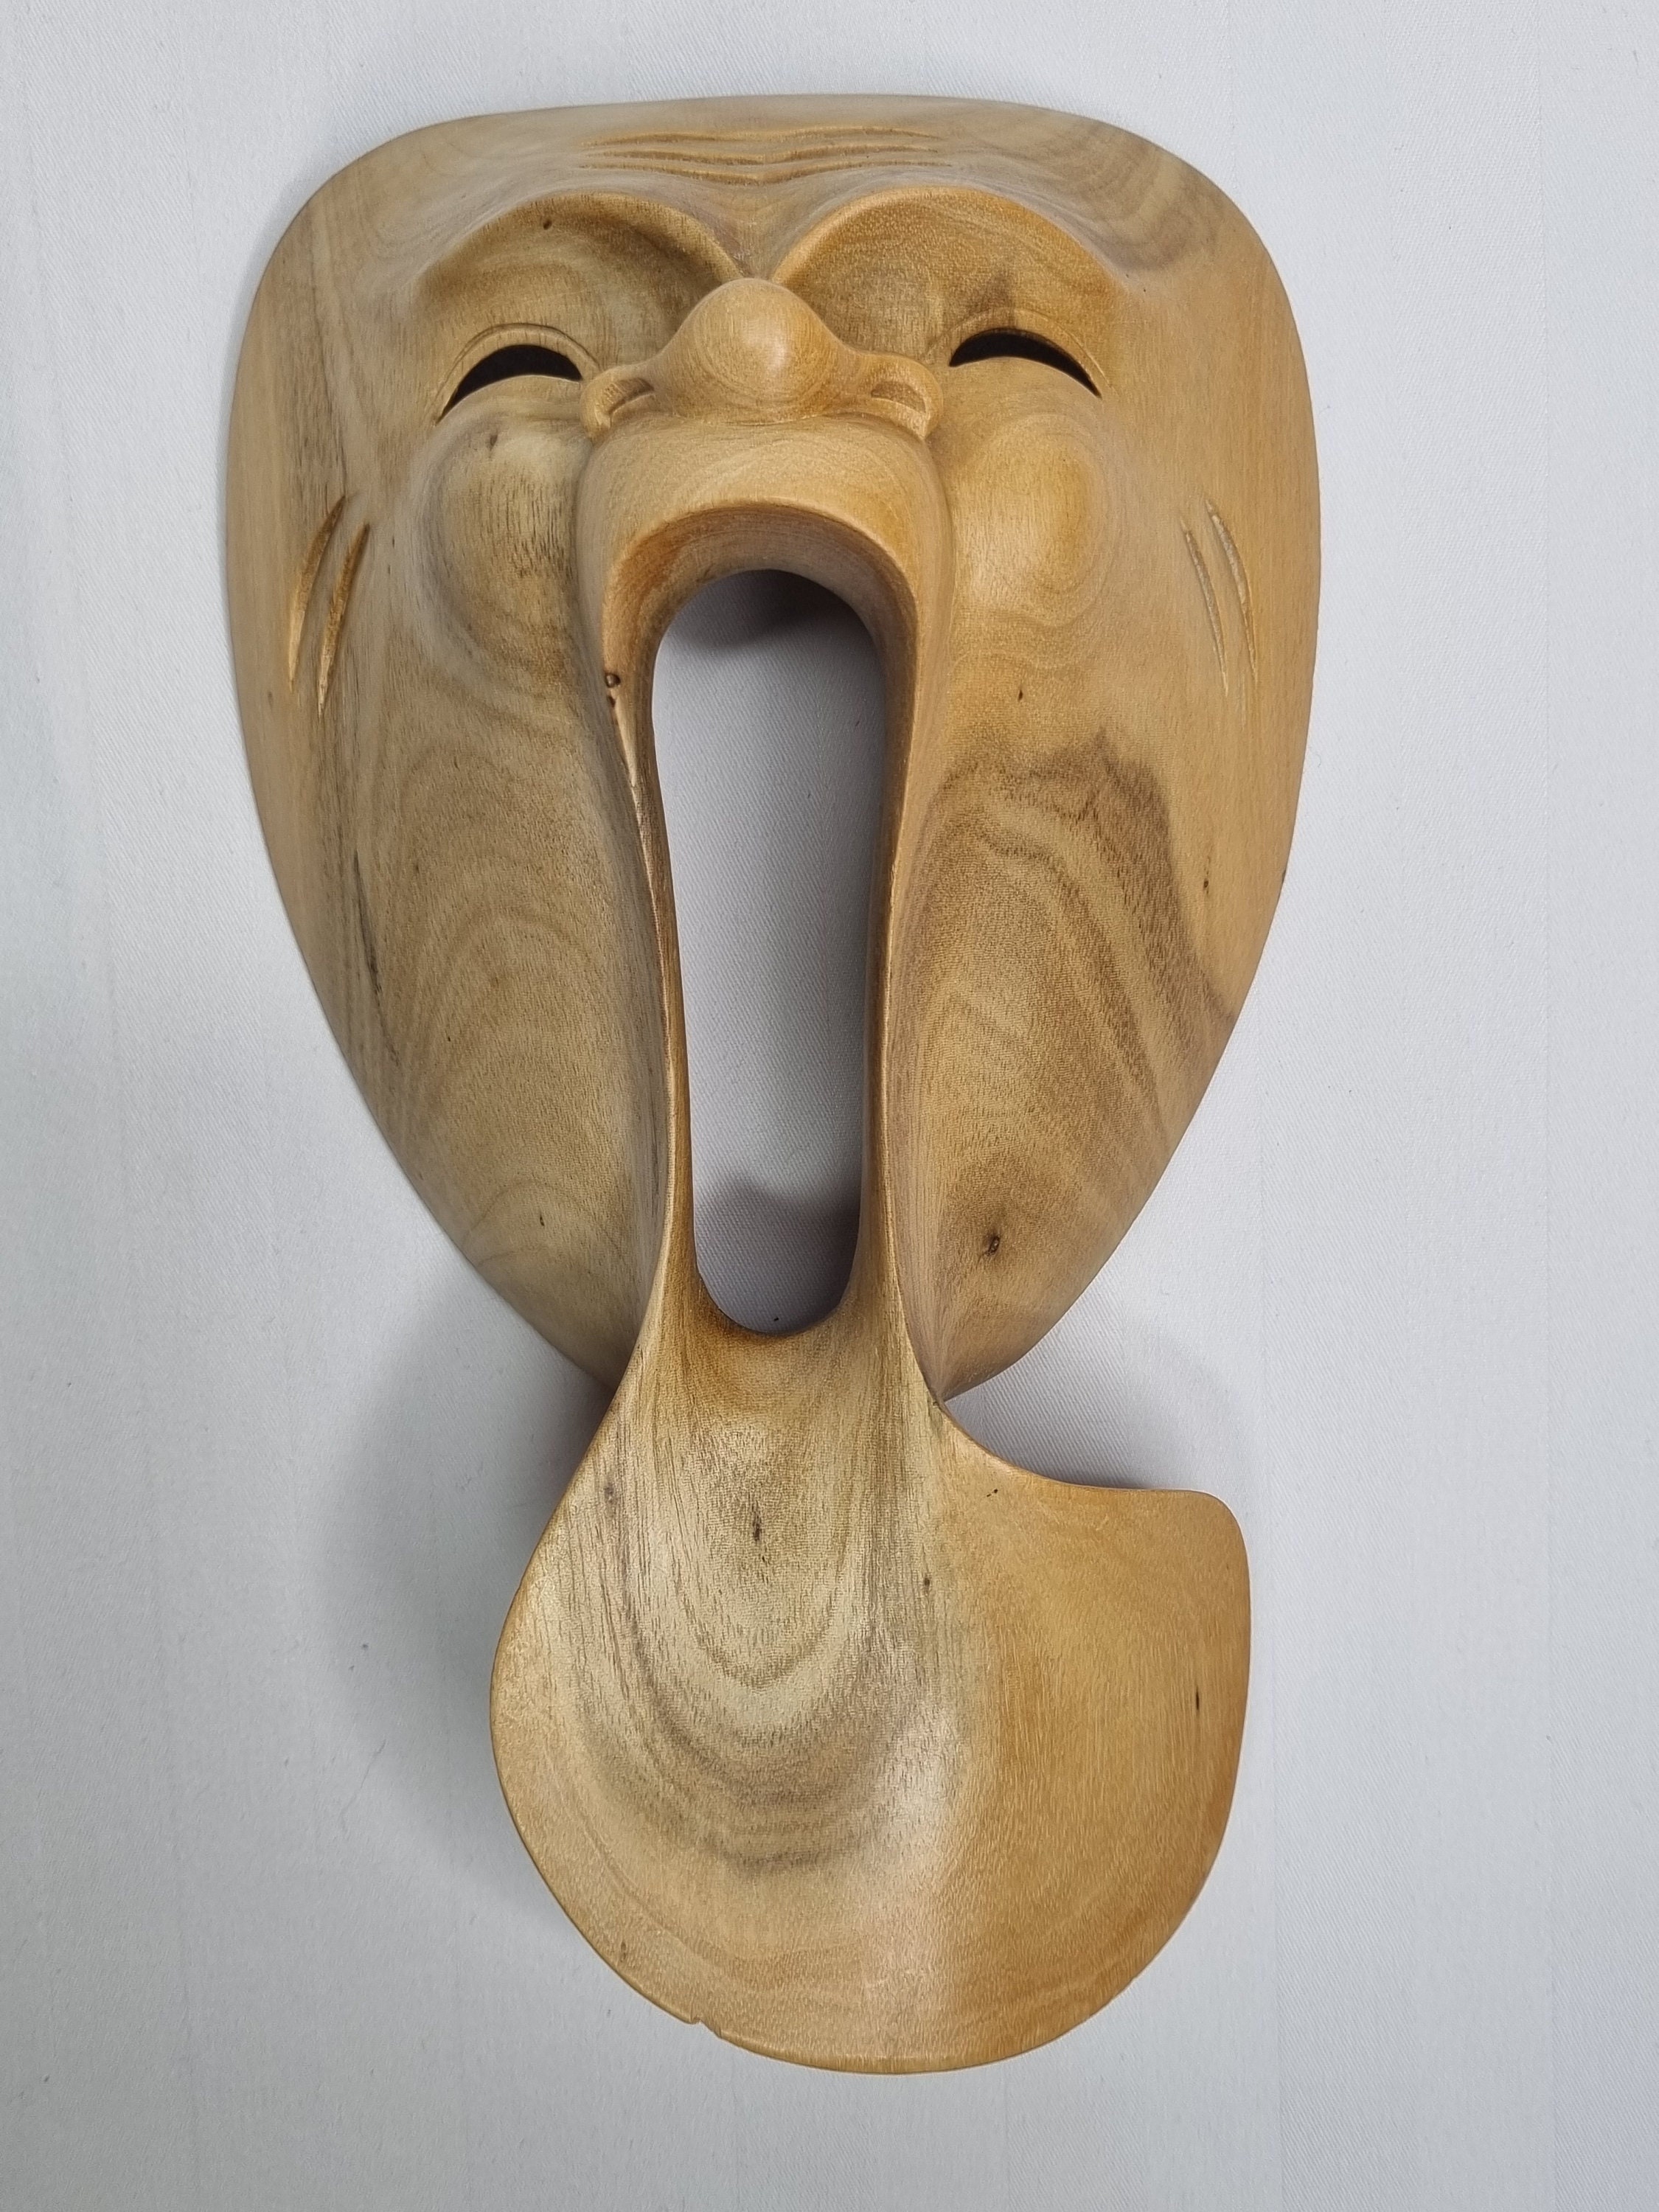 Hibiscus Wood Theatrical Mask - Big Nose